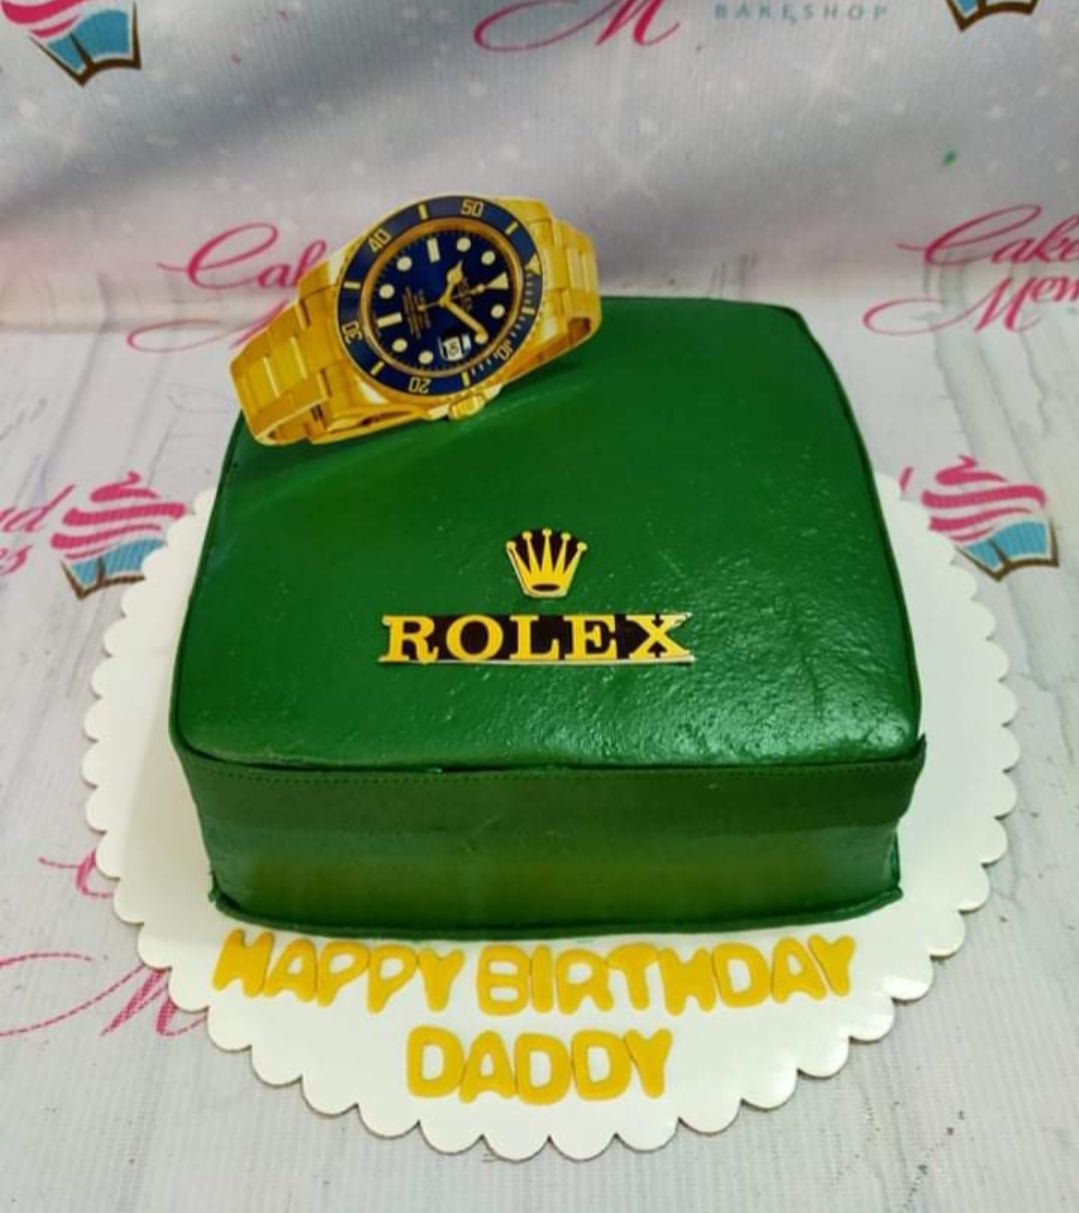 Watch Cakes Ideas For Him || Rolex Watch Cake Ideas ⌚ ✓ Cakes For Him on  Birthday or Success Party - YouTube